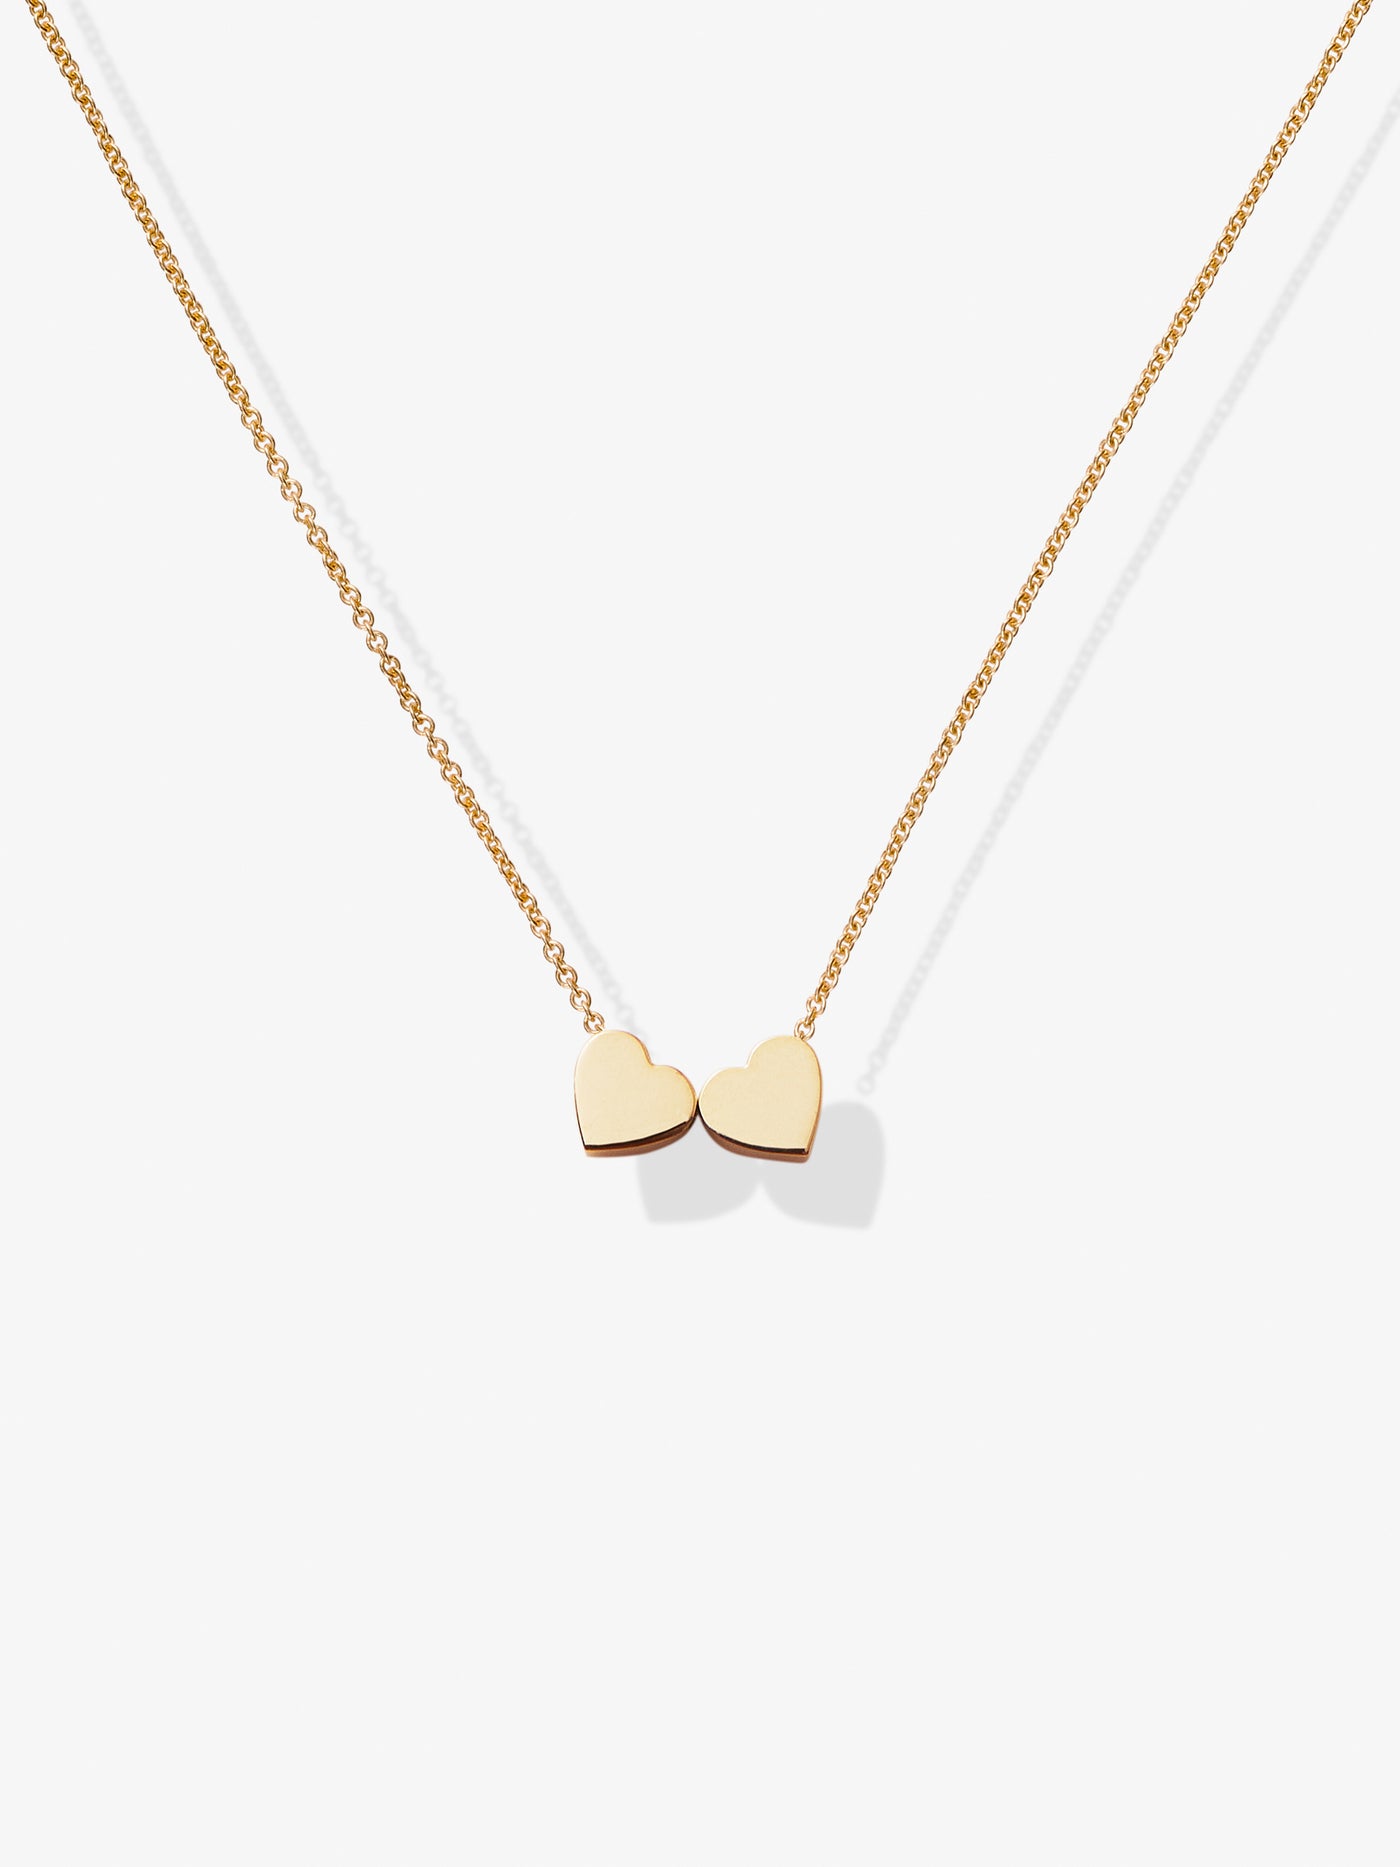 Hearts Necklace in 18k Gold